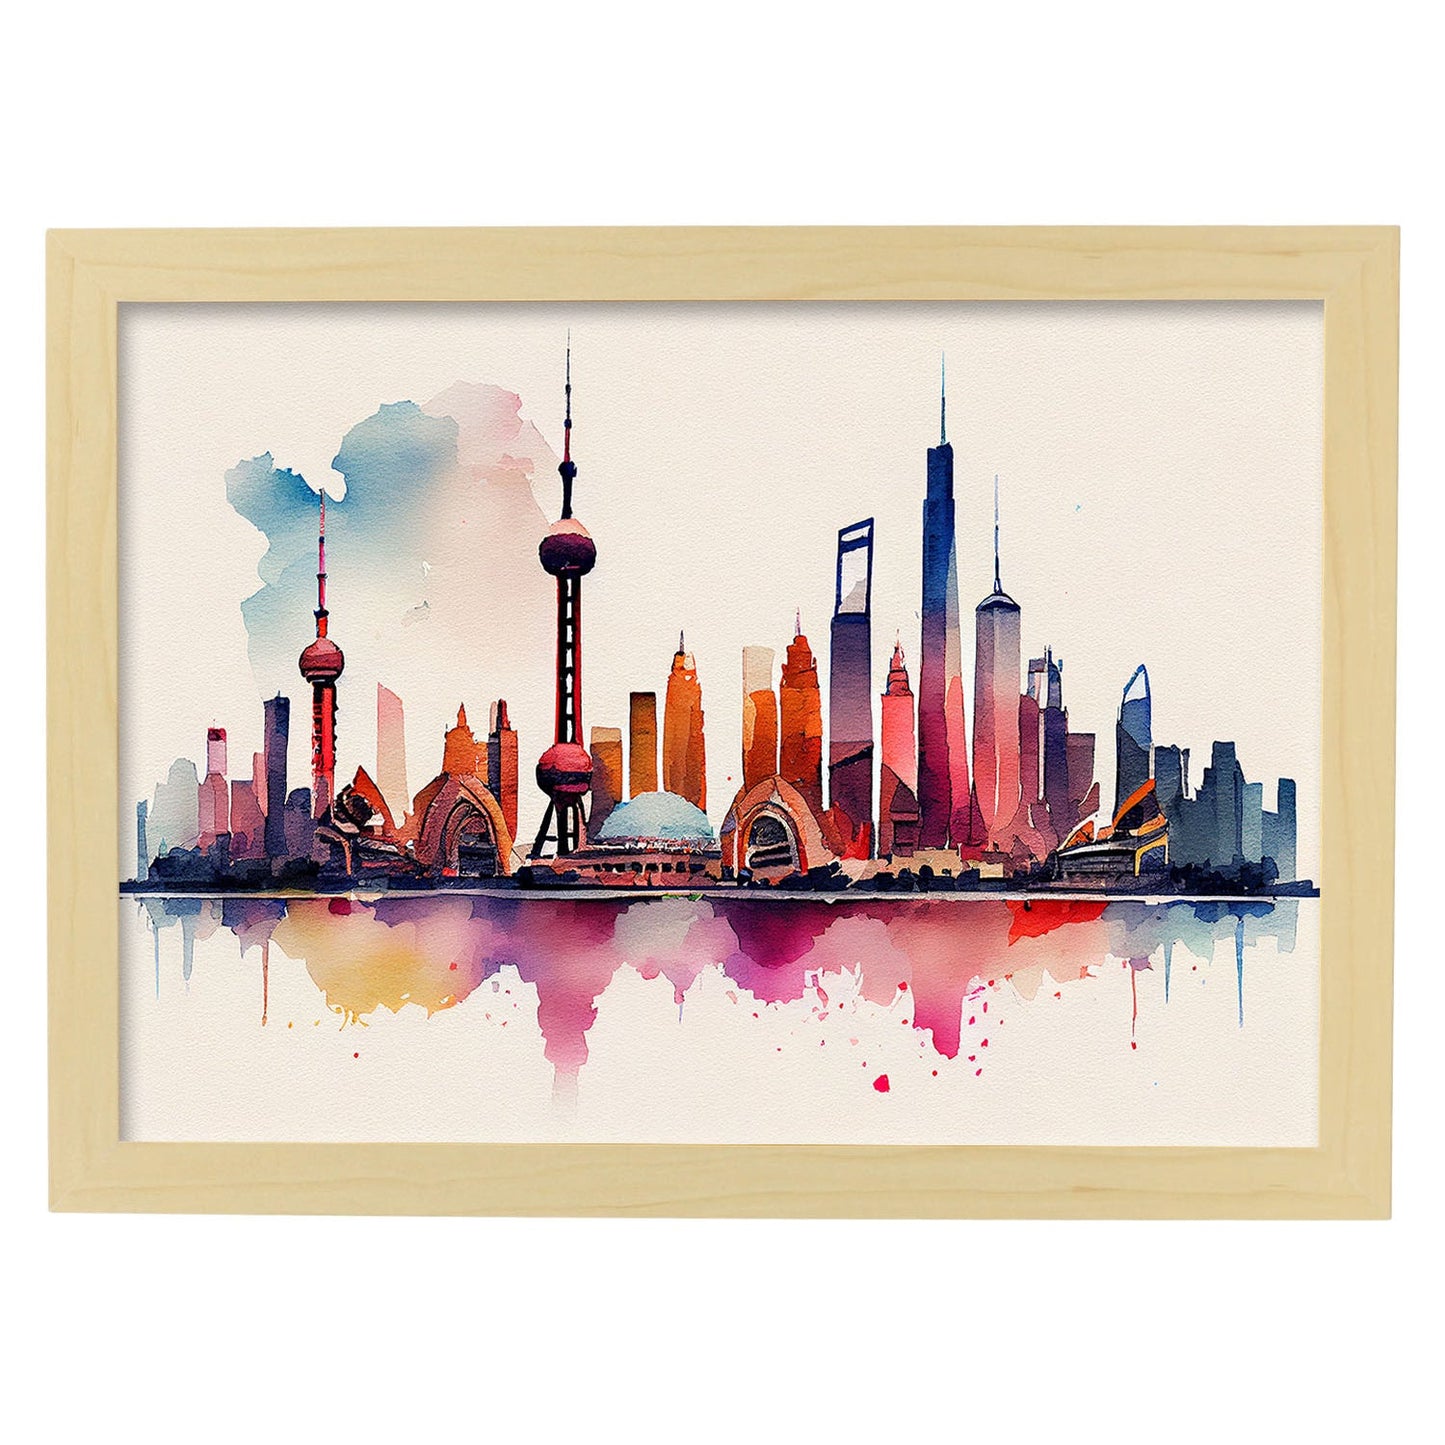 Nacnic watercolor of a skyline of the city of Shanghai_3. Aesthetic Wall Art Prints for Bedroom or Living Room Design.-Artwork-Nacnic-A4-Marco Madera Clara-Nacnic Estudio SL